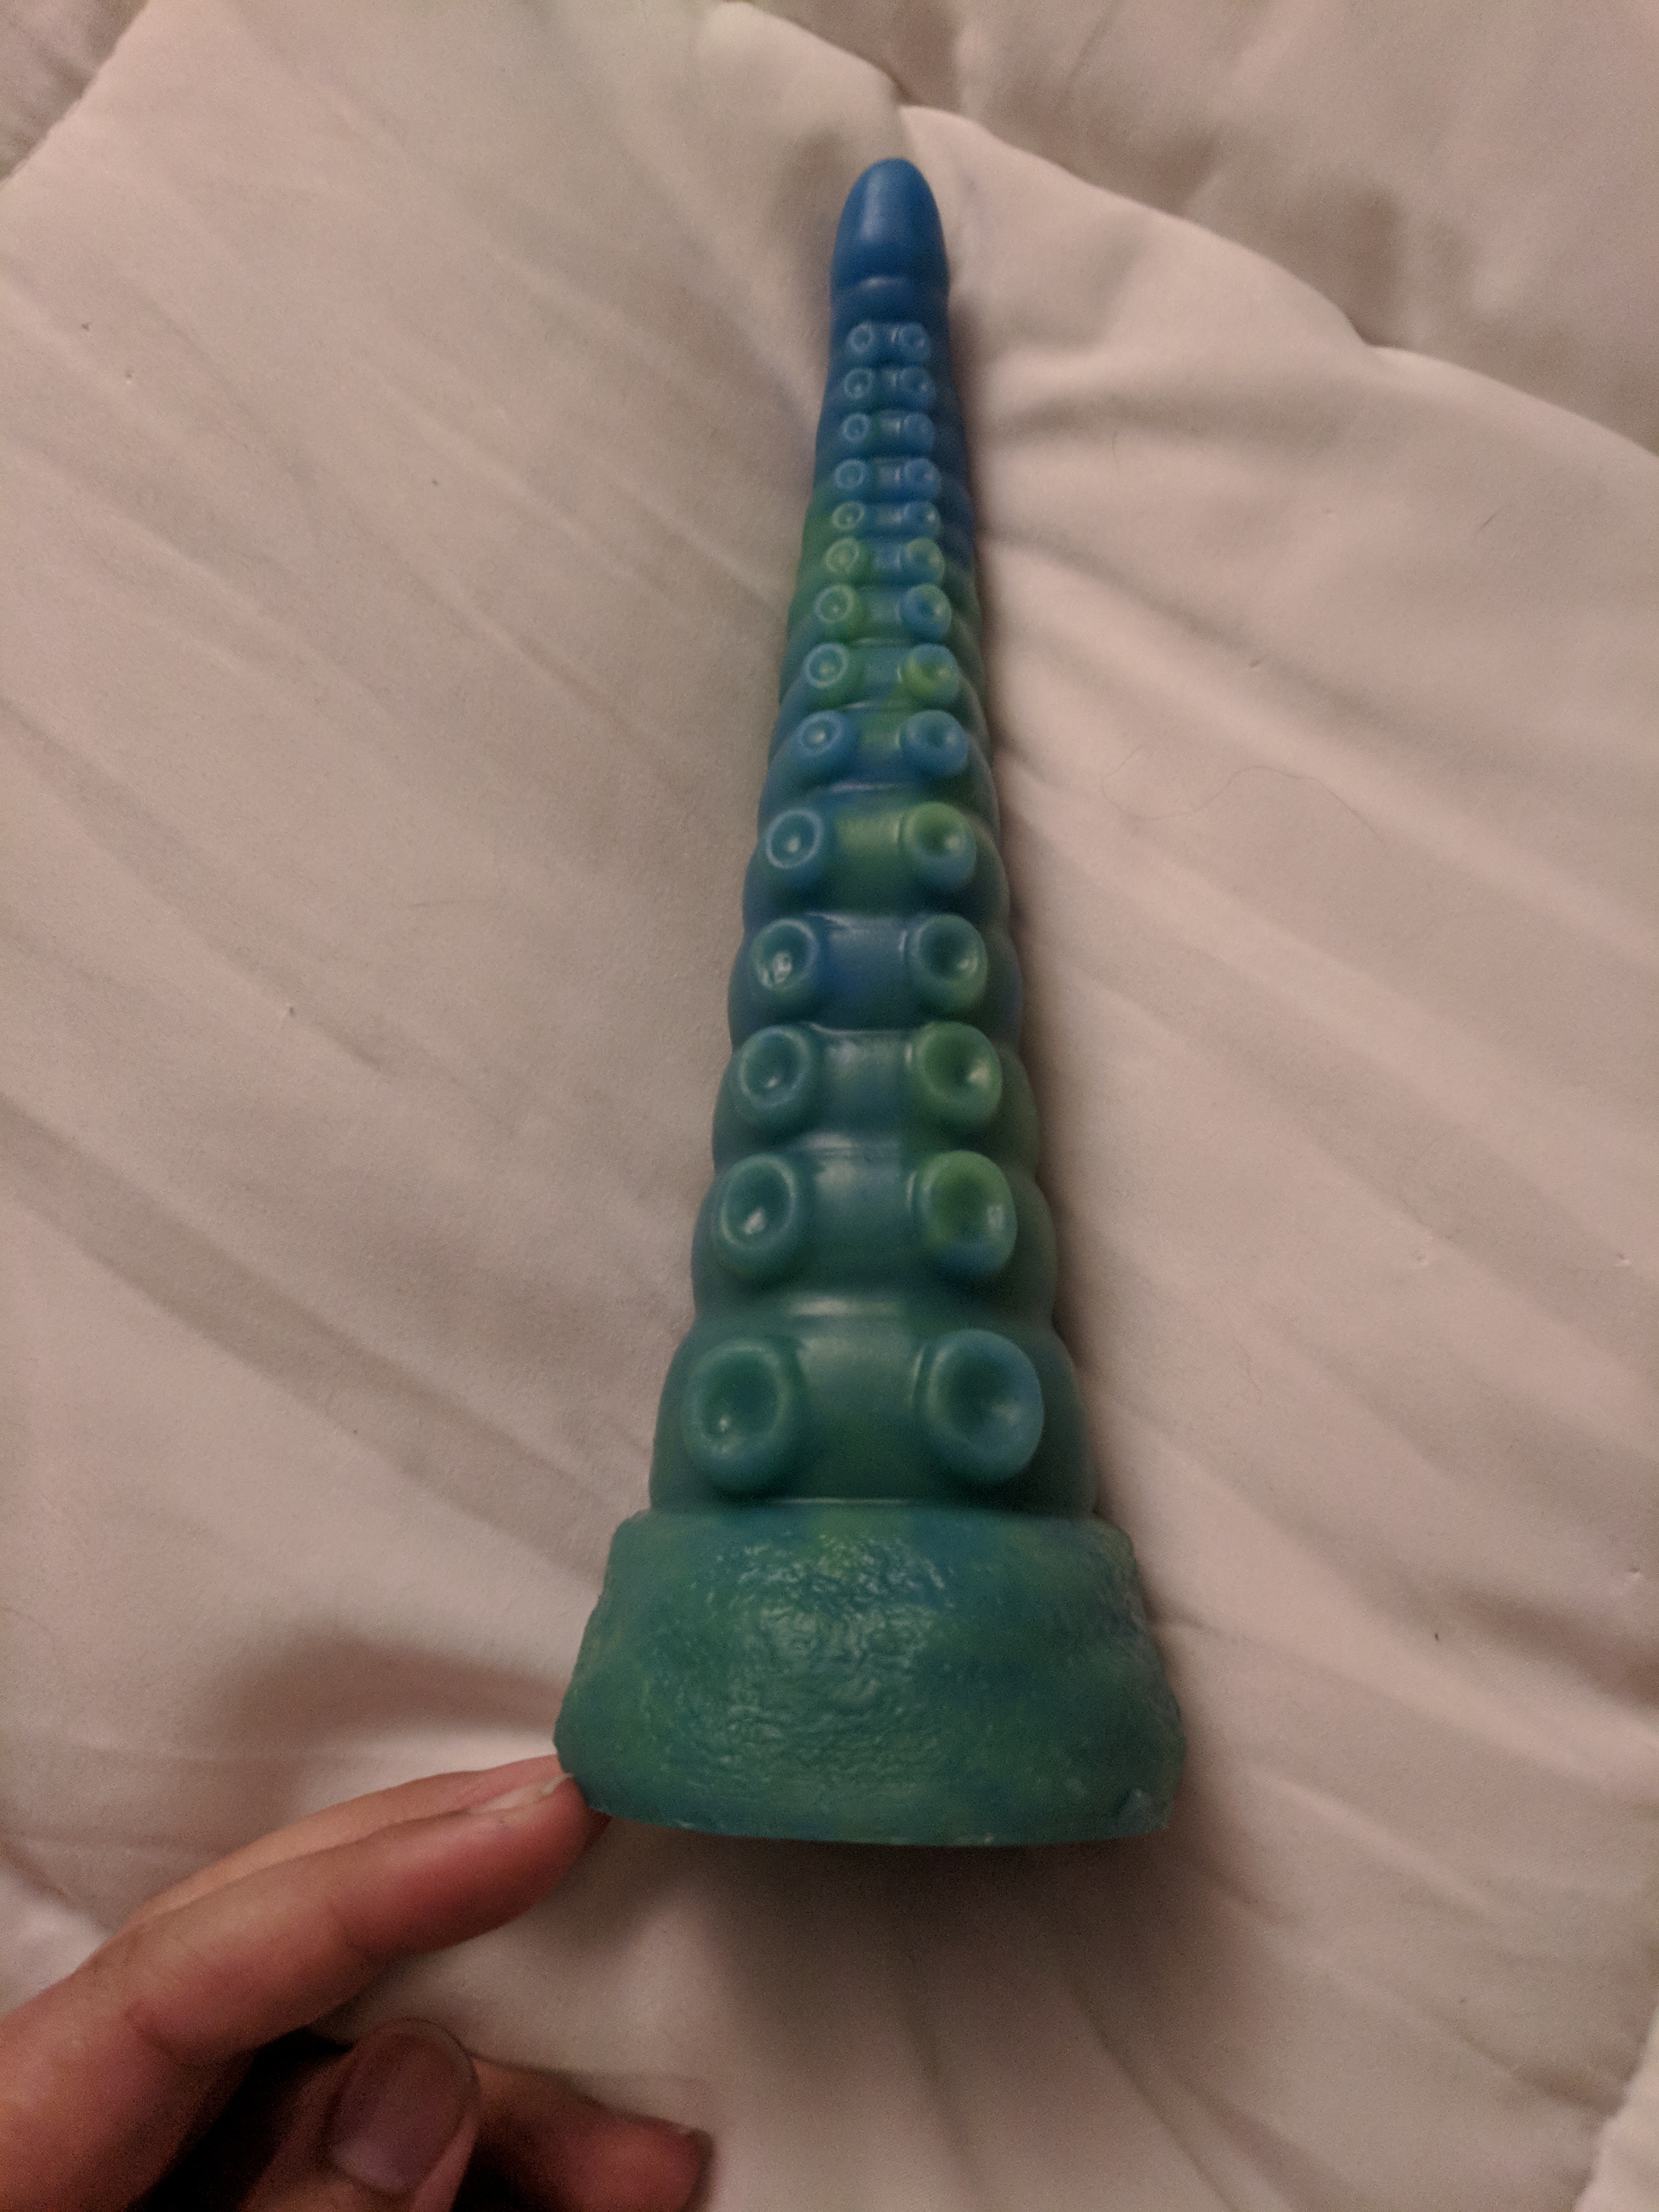 Tentacle dildo on bed at a different angle, with suction cups facing up toward the camera